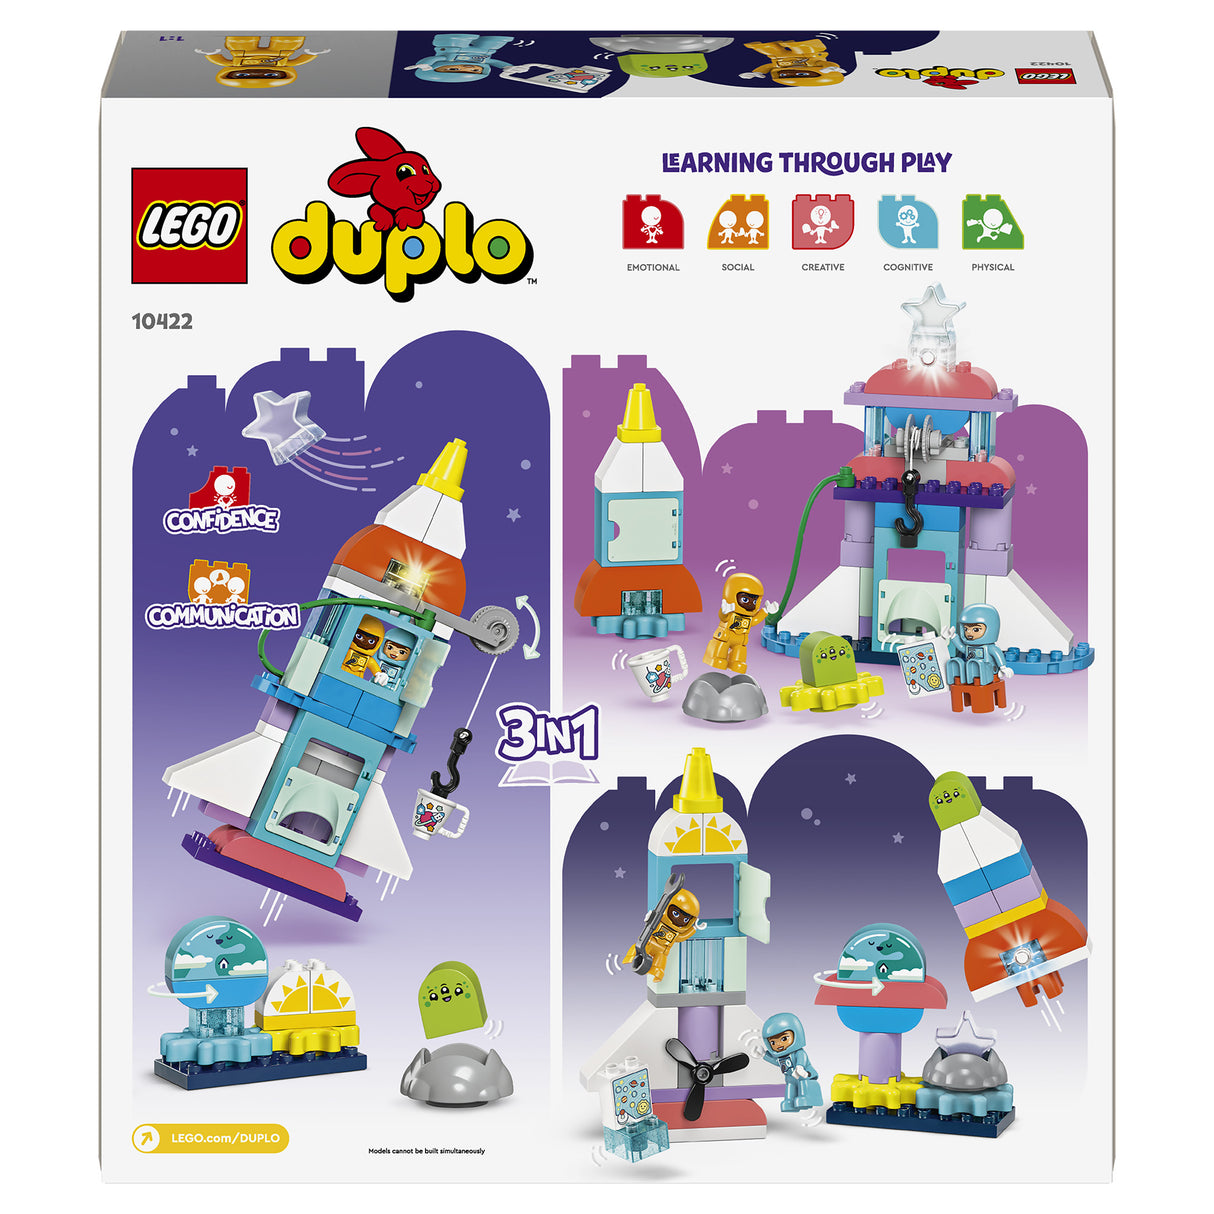 LEGO Duplo 3in1 Space